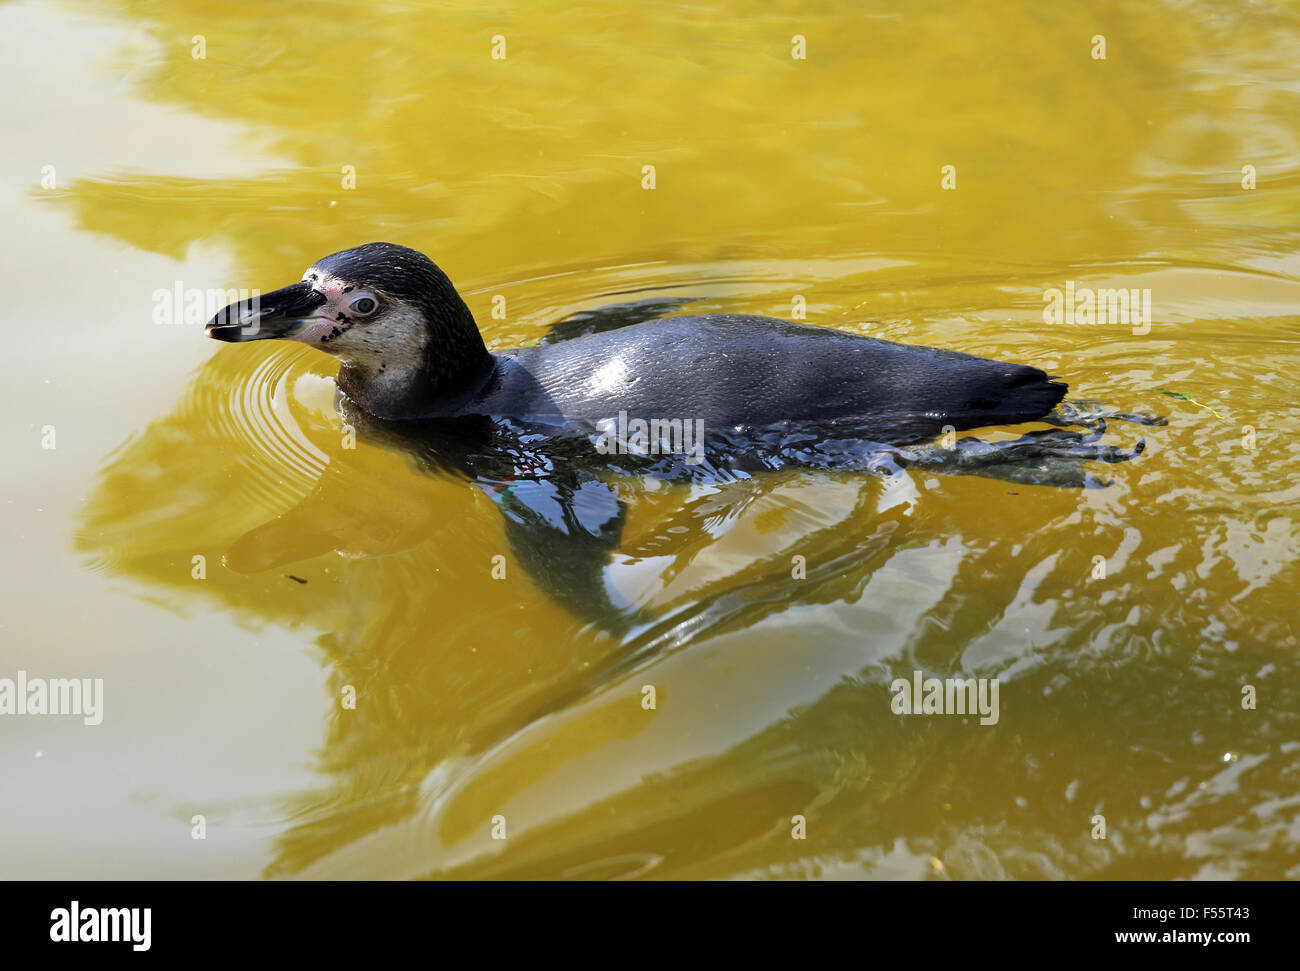 08.05.2015, Berlin, Berlin, Germany - Jackass Penguin swims in a pool of water in the Tierpark Berlin. 00S150508D829CAROEX.JPG - NOT for SALE in G E R M A N Y, A U S T R I A, S W I T Z E R L A N D [MODEL RELEASE: NOT APPLICABLE,, PROPERTY RELEASE: NO (c) caro photo agency / Sorge, http://www.caro-images.pl, info@carofoto.pl - In case of using the picture for non-journalistic purposes, please contact the agency - the picture is subject to royalty!] Stock Photo